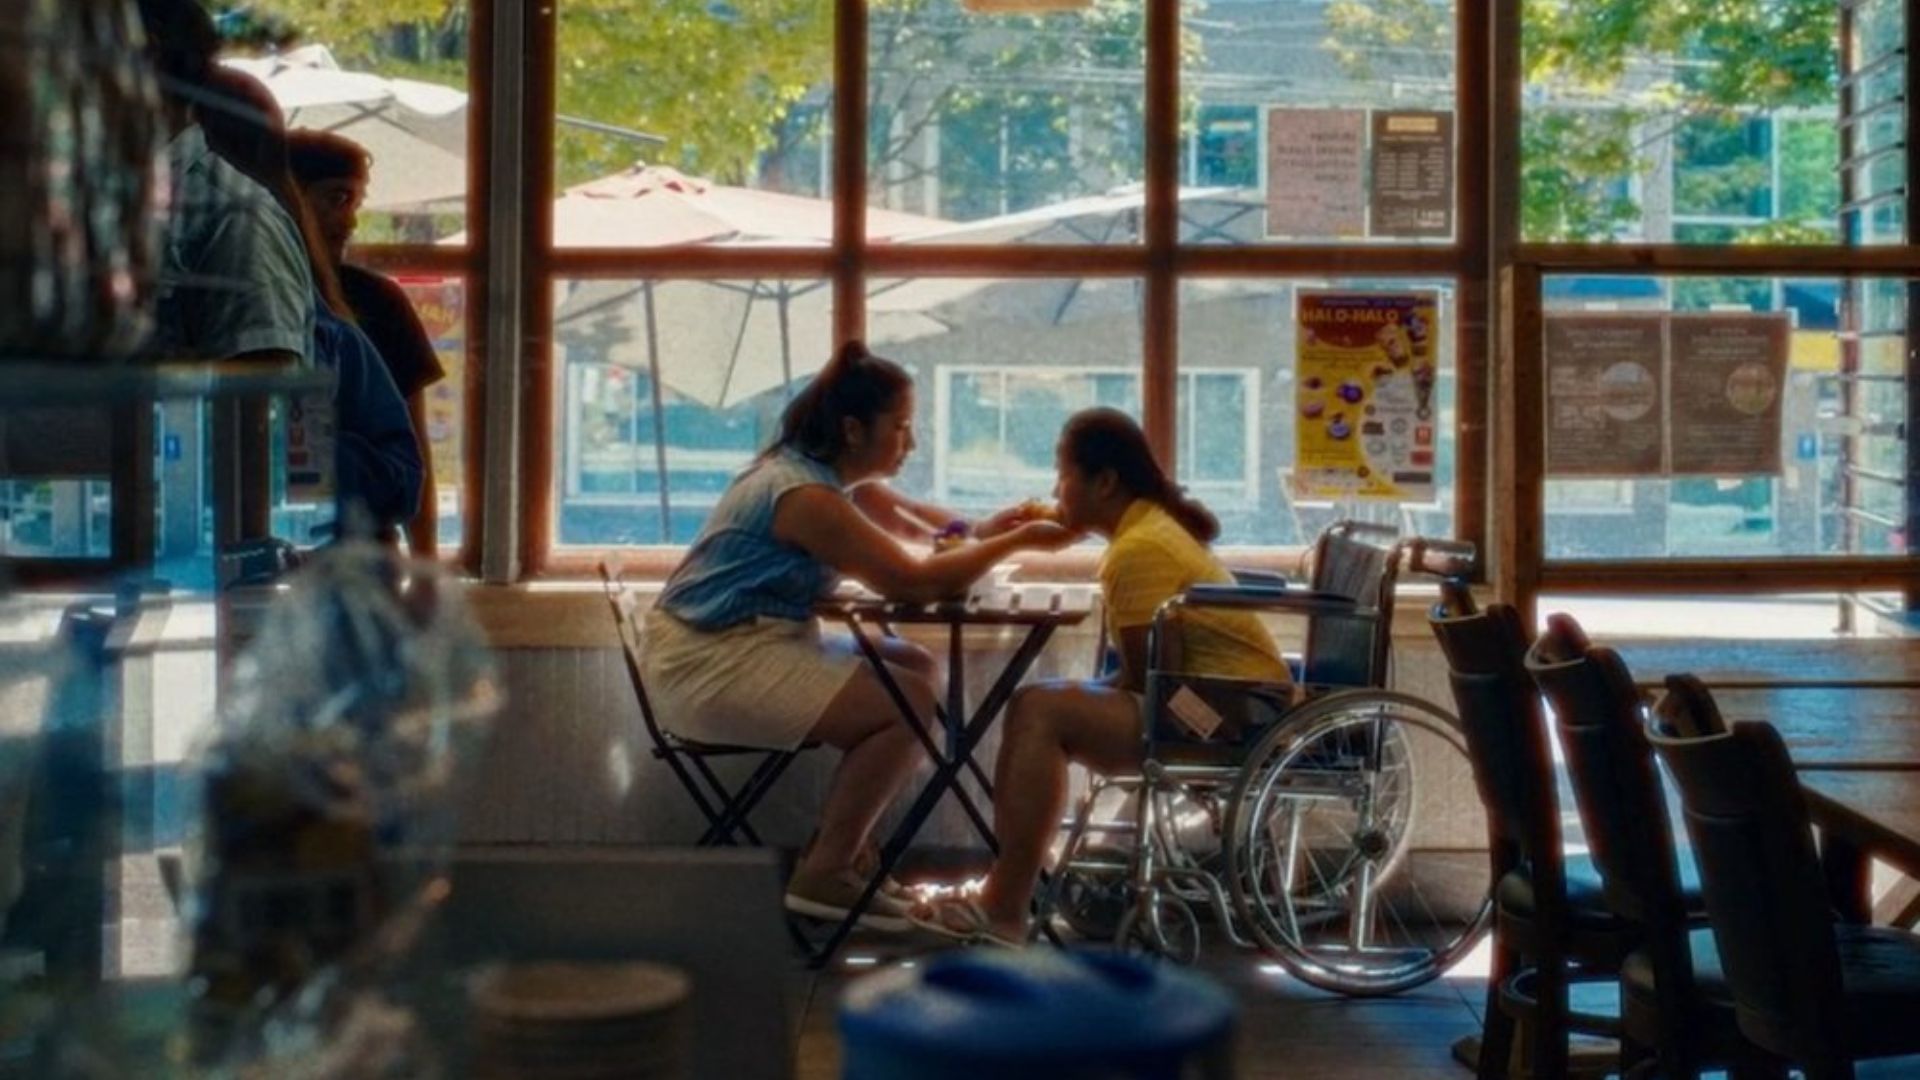 two women sitting at cafe table near window looking closely at each other